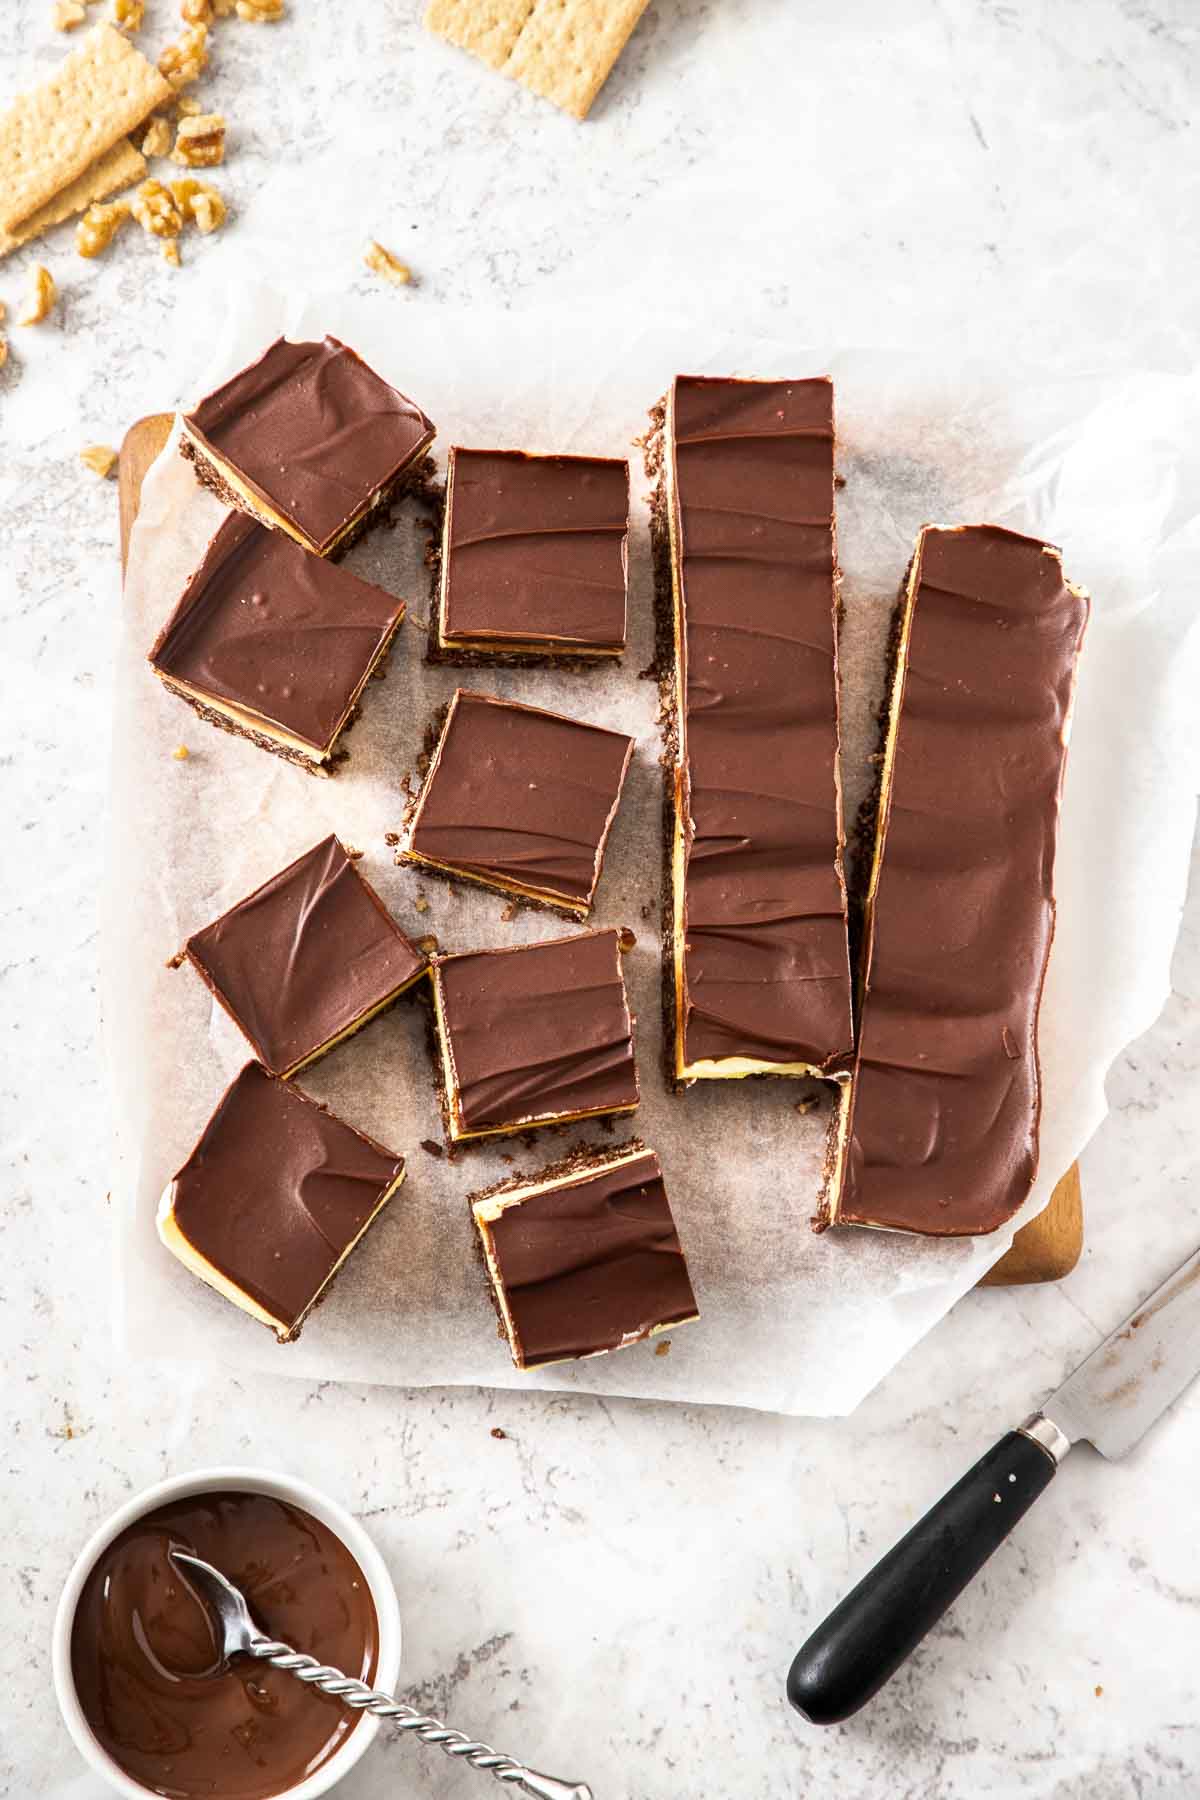 An overhead view of Nanaimo bars being sliced up into portions.